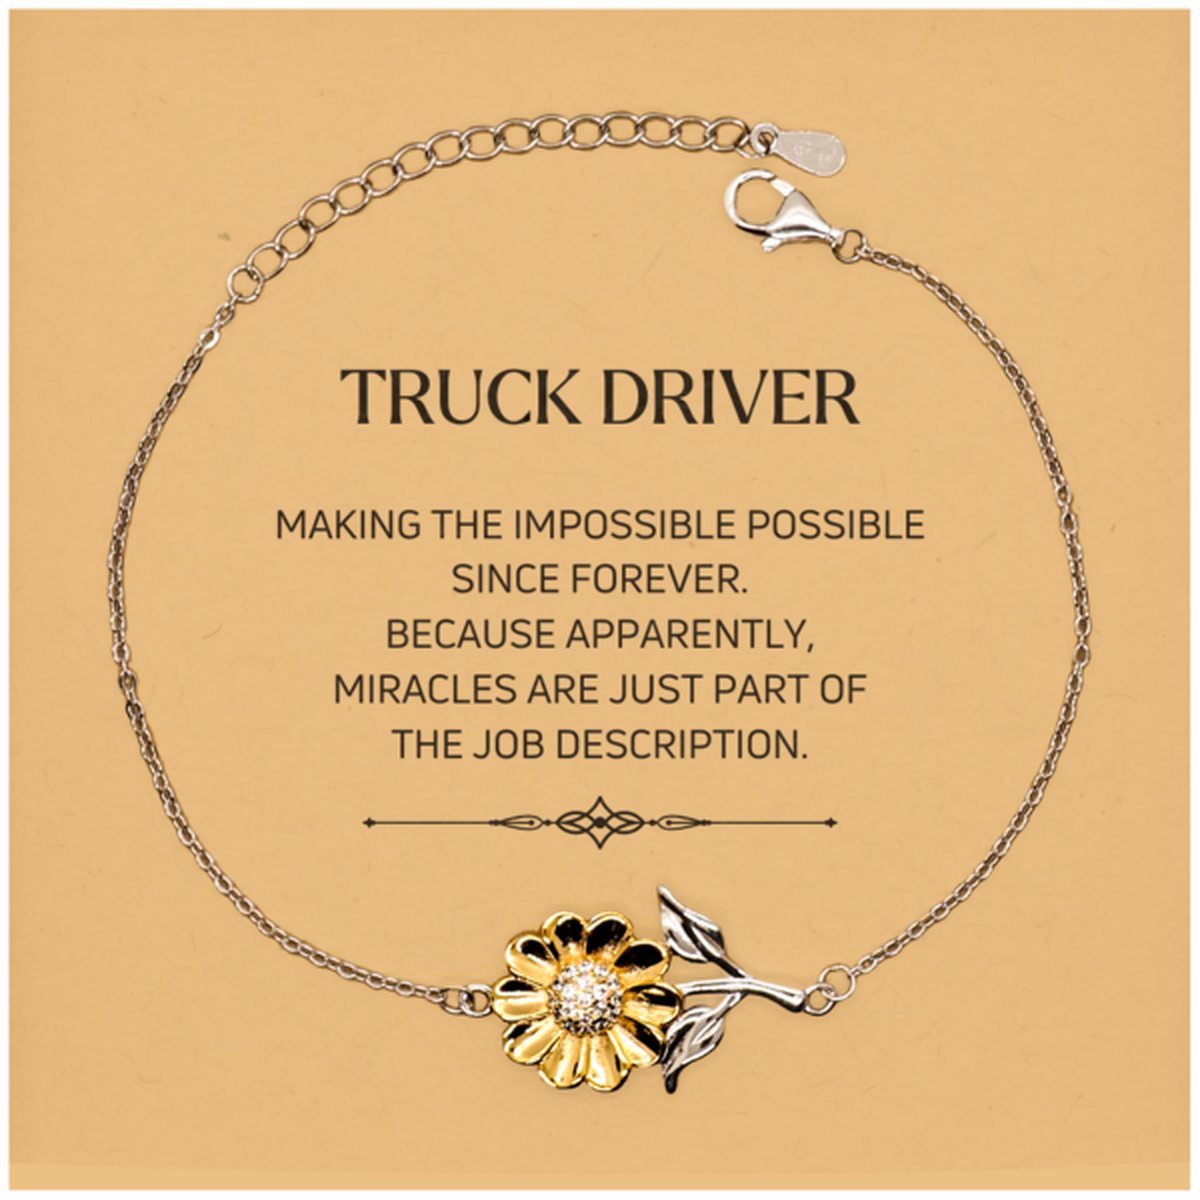 Funny Truck Driver Gifts, Miracles are just part of the job description, Inspirational Birthday Christmas Sunflower Bracelet For Truck Driver, Men, Women, Coworkers, Friends, Boss